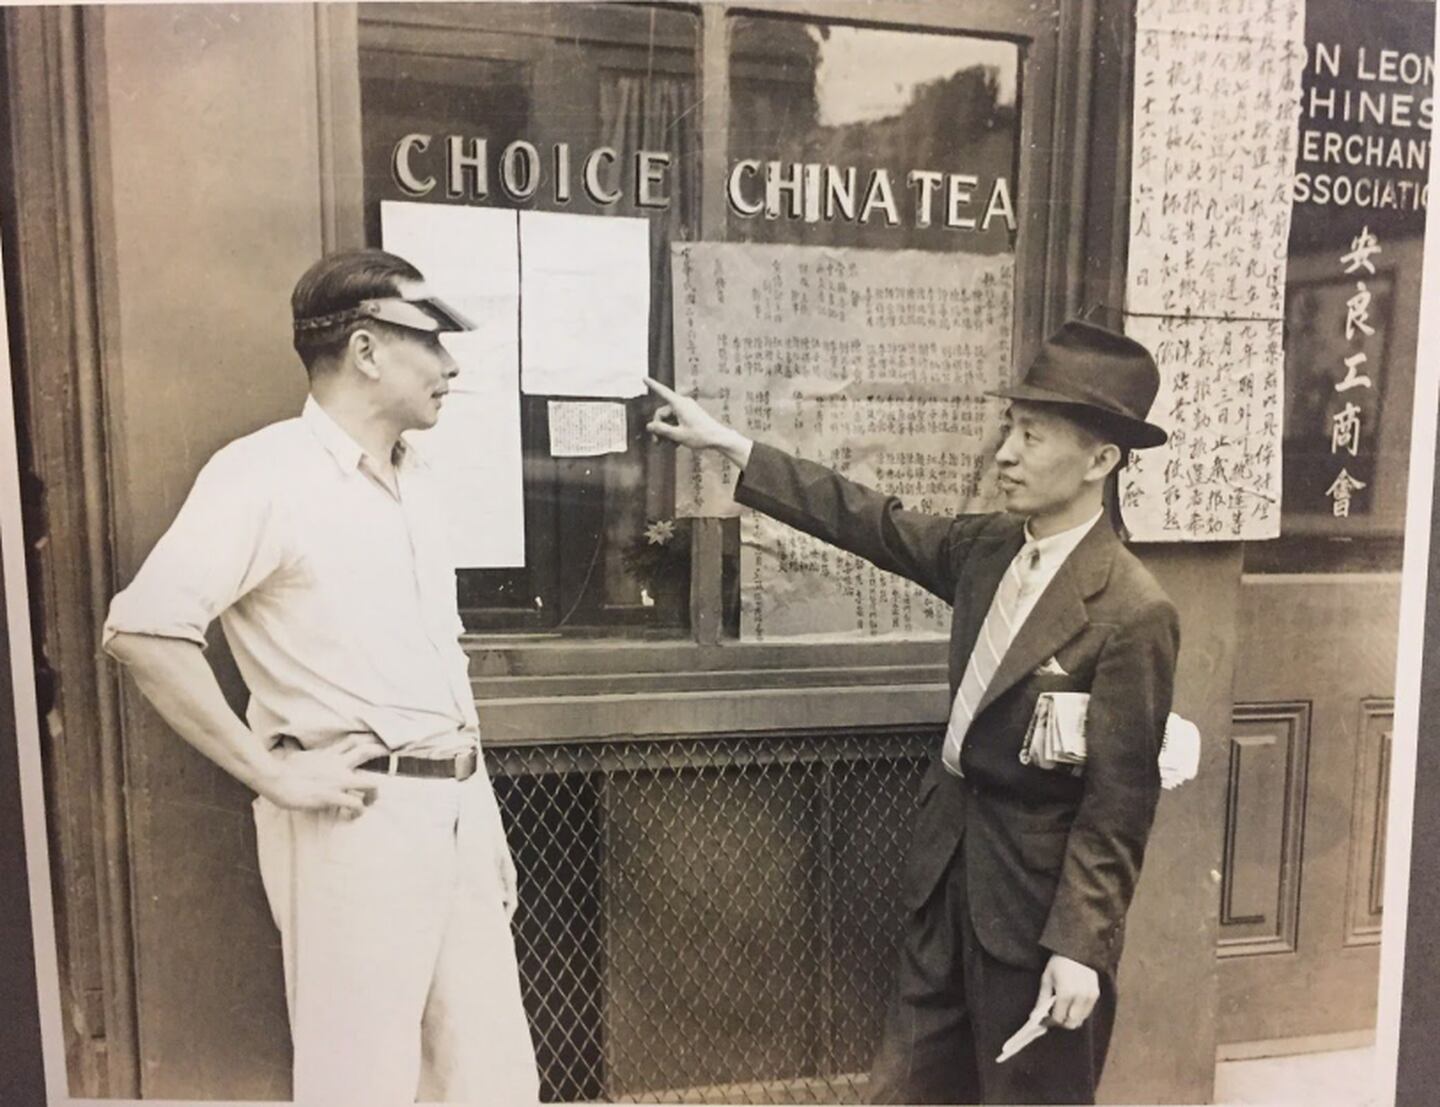 In this sepia-toned photo, two men stand outside a storefront that reads "Choice China Tea." One man points at papers posted in the window. Chinese calligraphy hangs in strips near